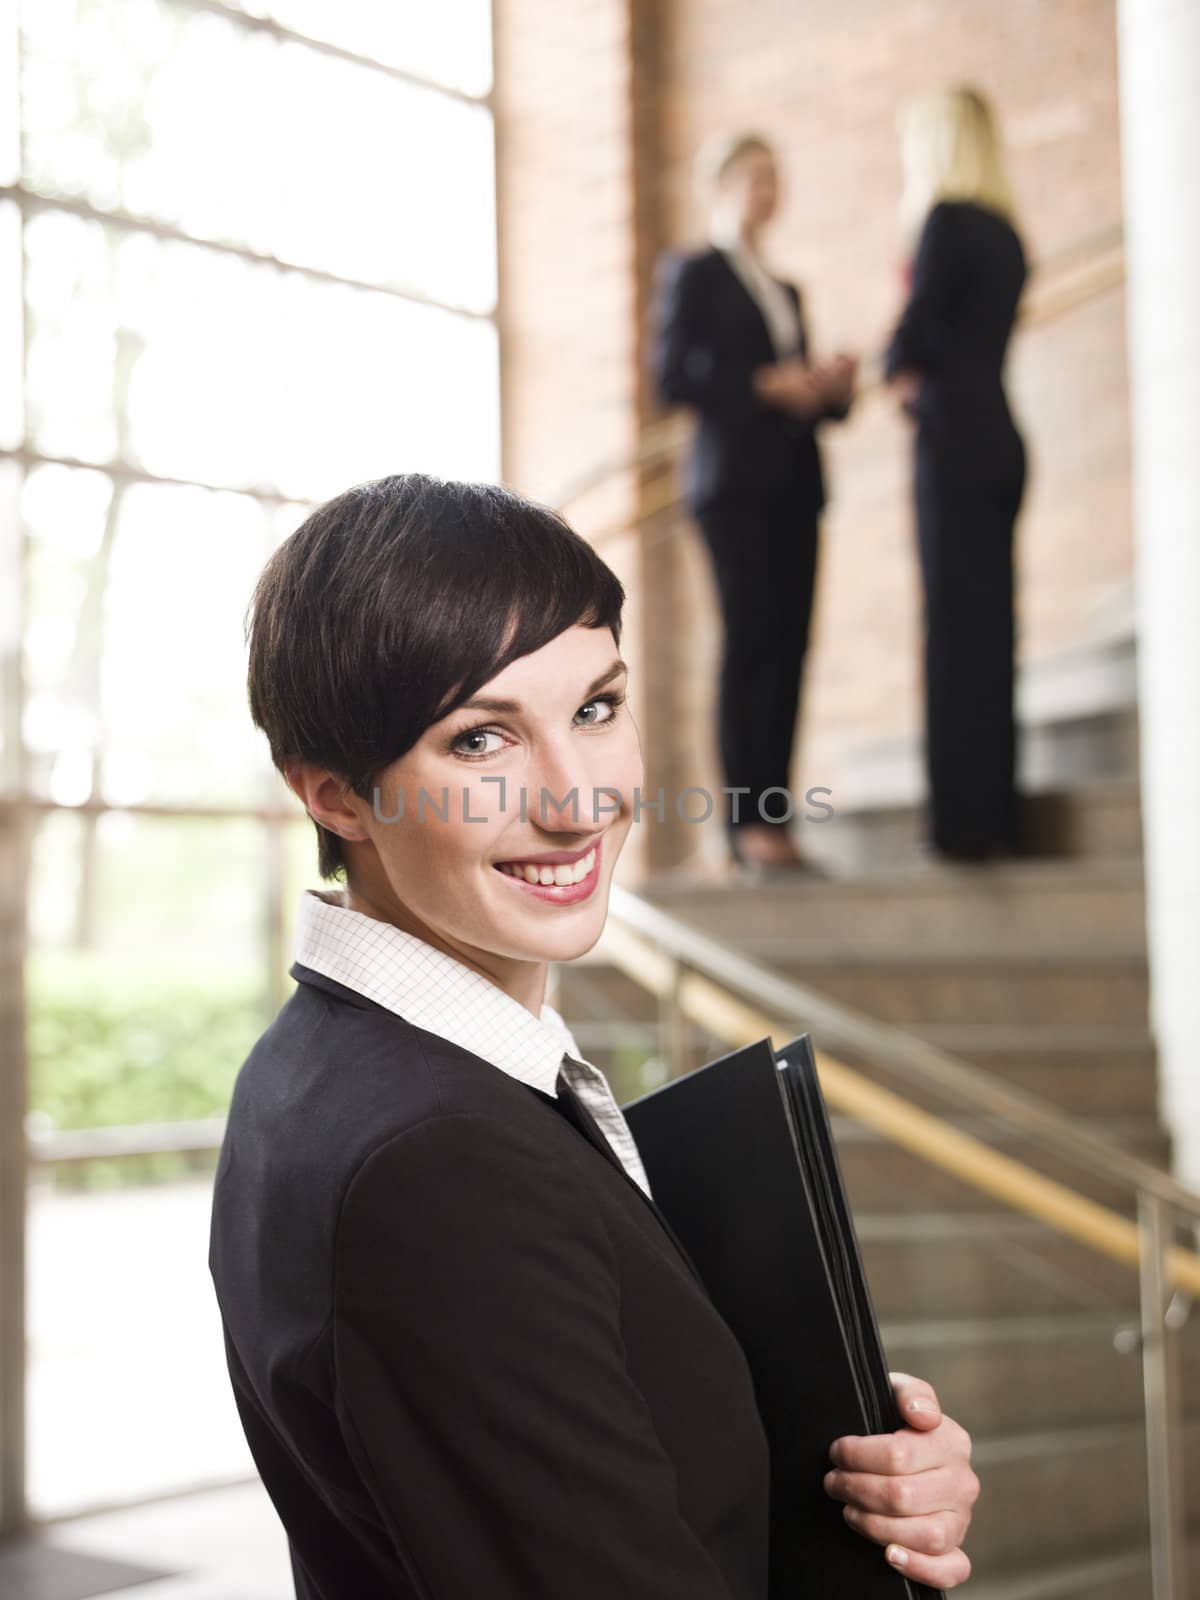 Smiling businesswoman with a folder by gemenacom